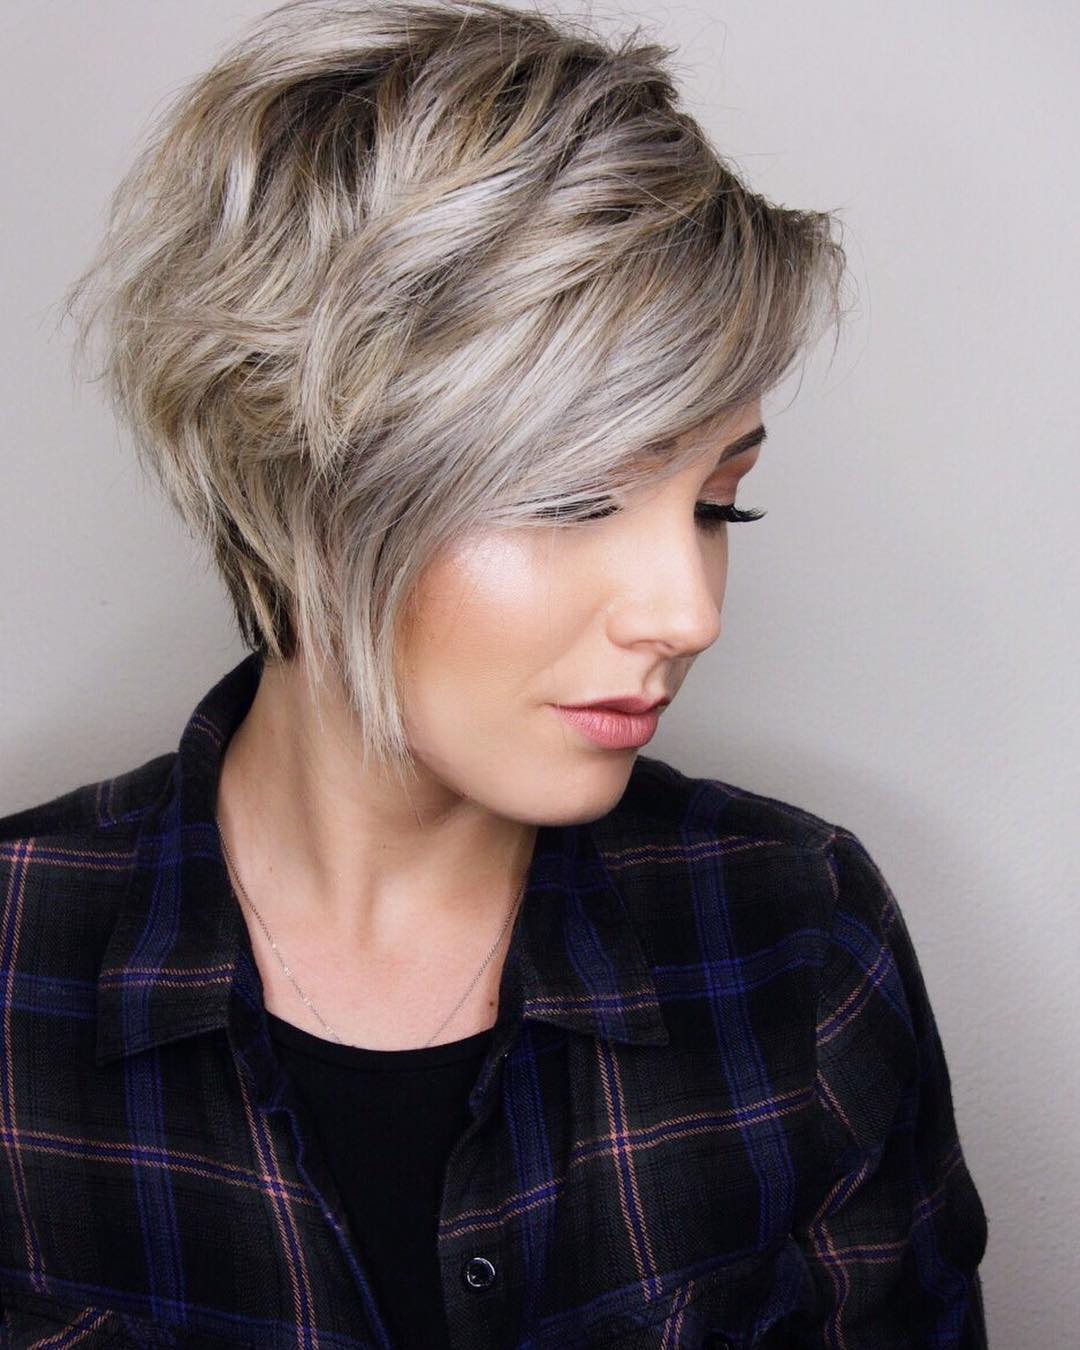 Hairstyles For Short Thick Hair
 10 Trendy Layered Short Haircut Ideas 2020 Extra